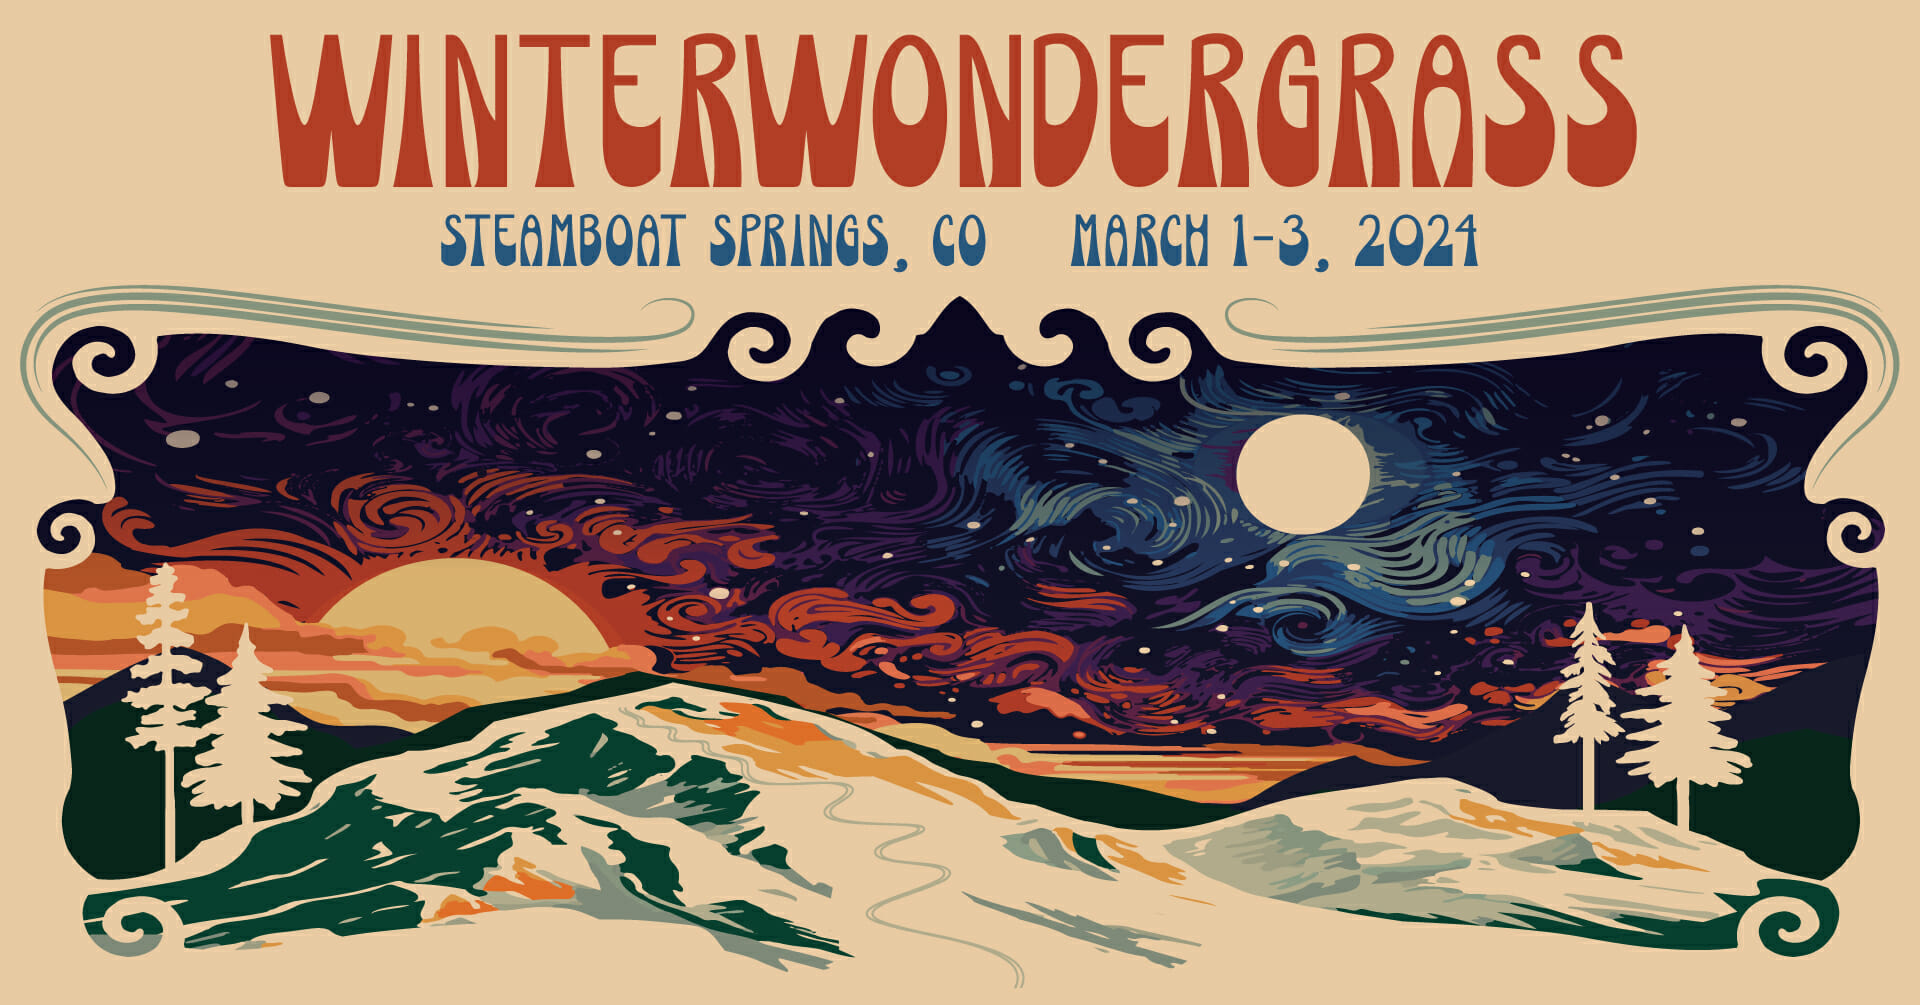 WinterWonderGrass Festival Delivers 2024 Artist Lineup: The Infamous Stringdusters, Sierra Ferrell and More